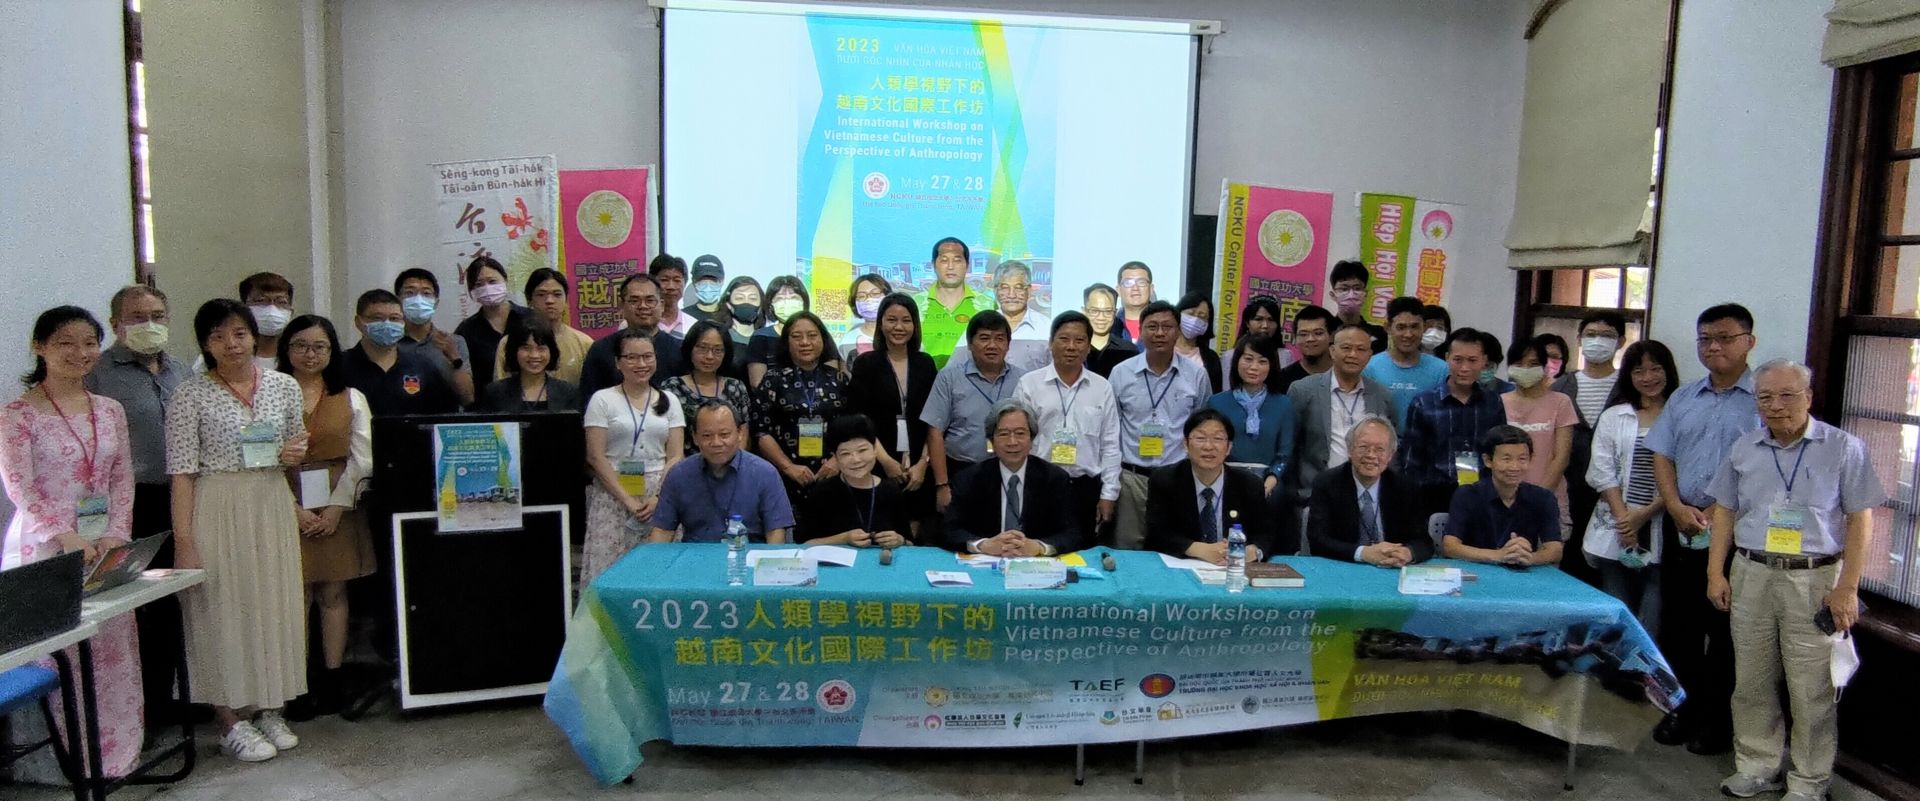 2023 International Workshop on Vietnamese Culture from an Anthropological Perspective